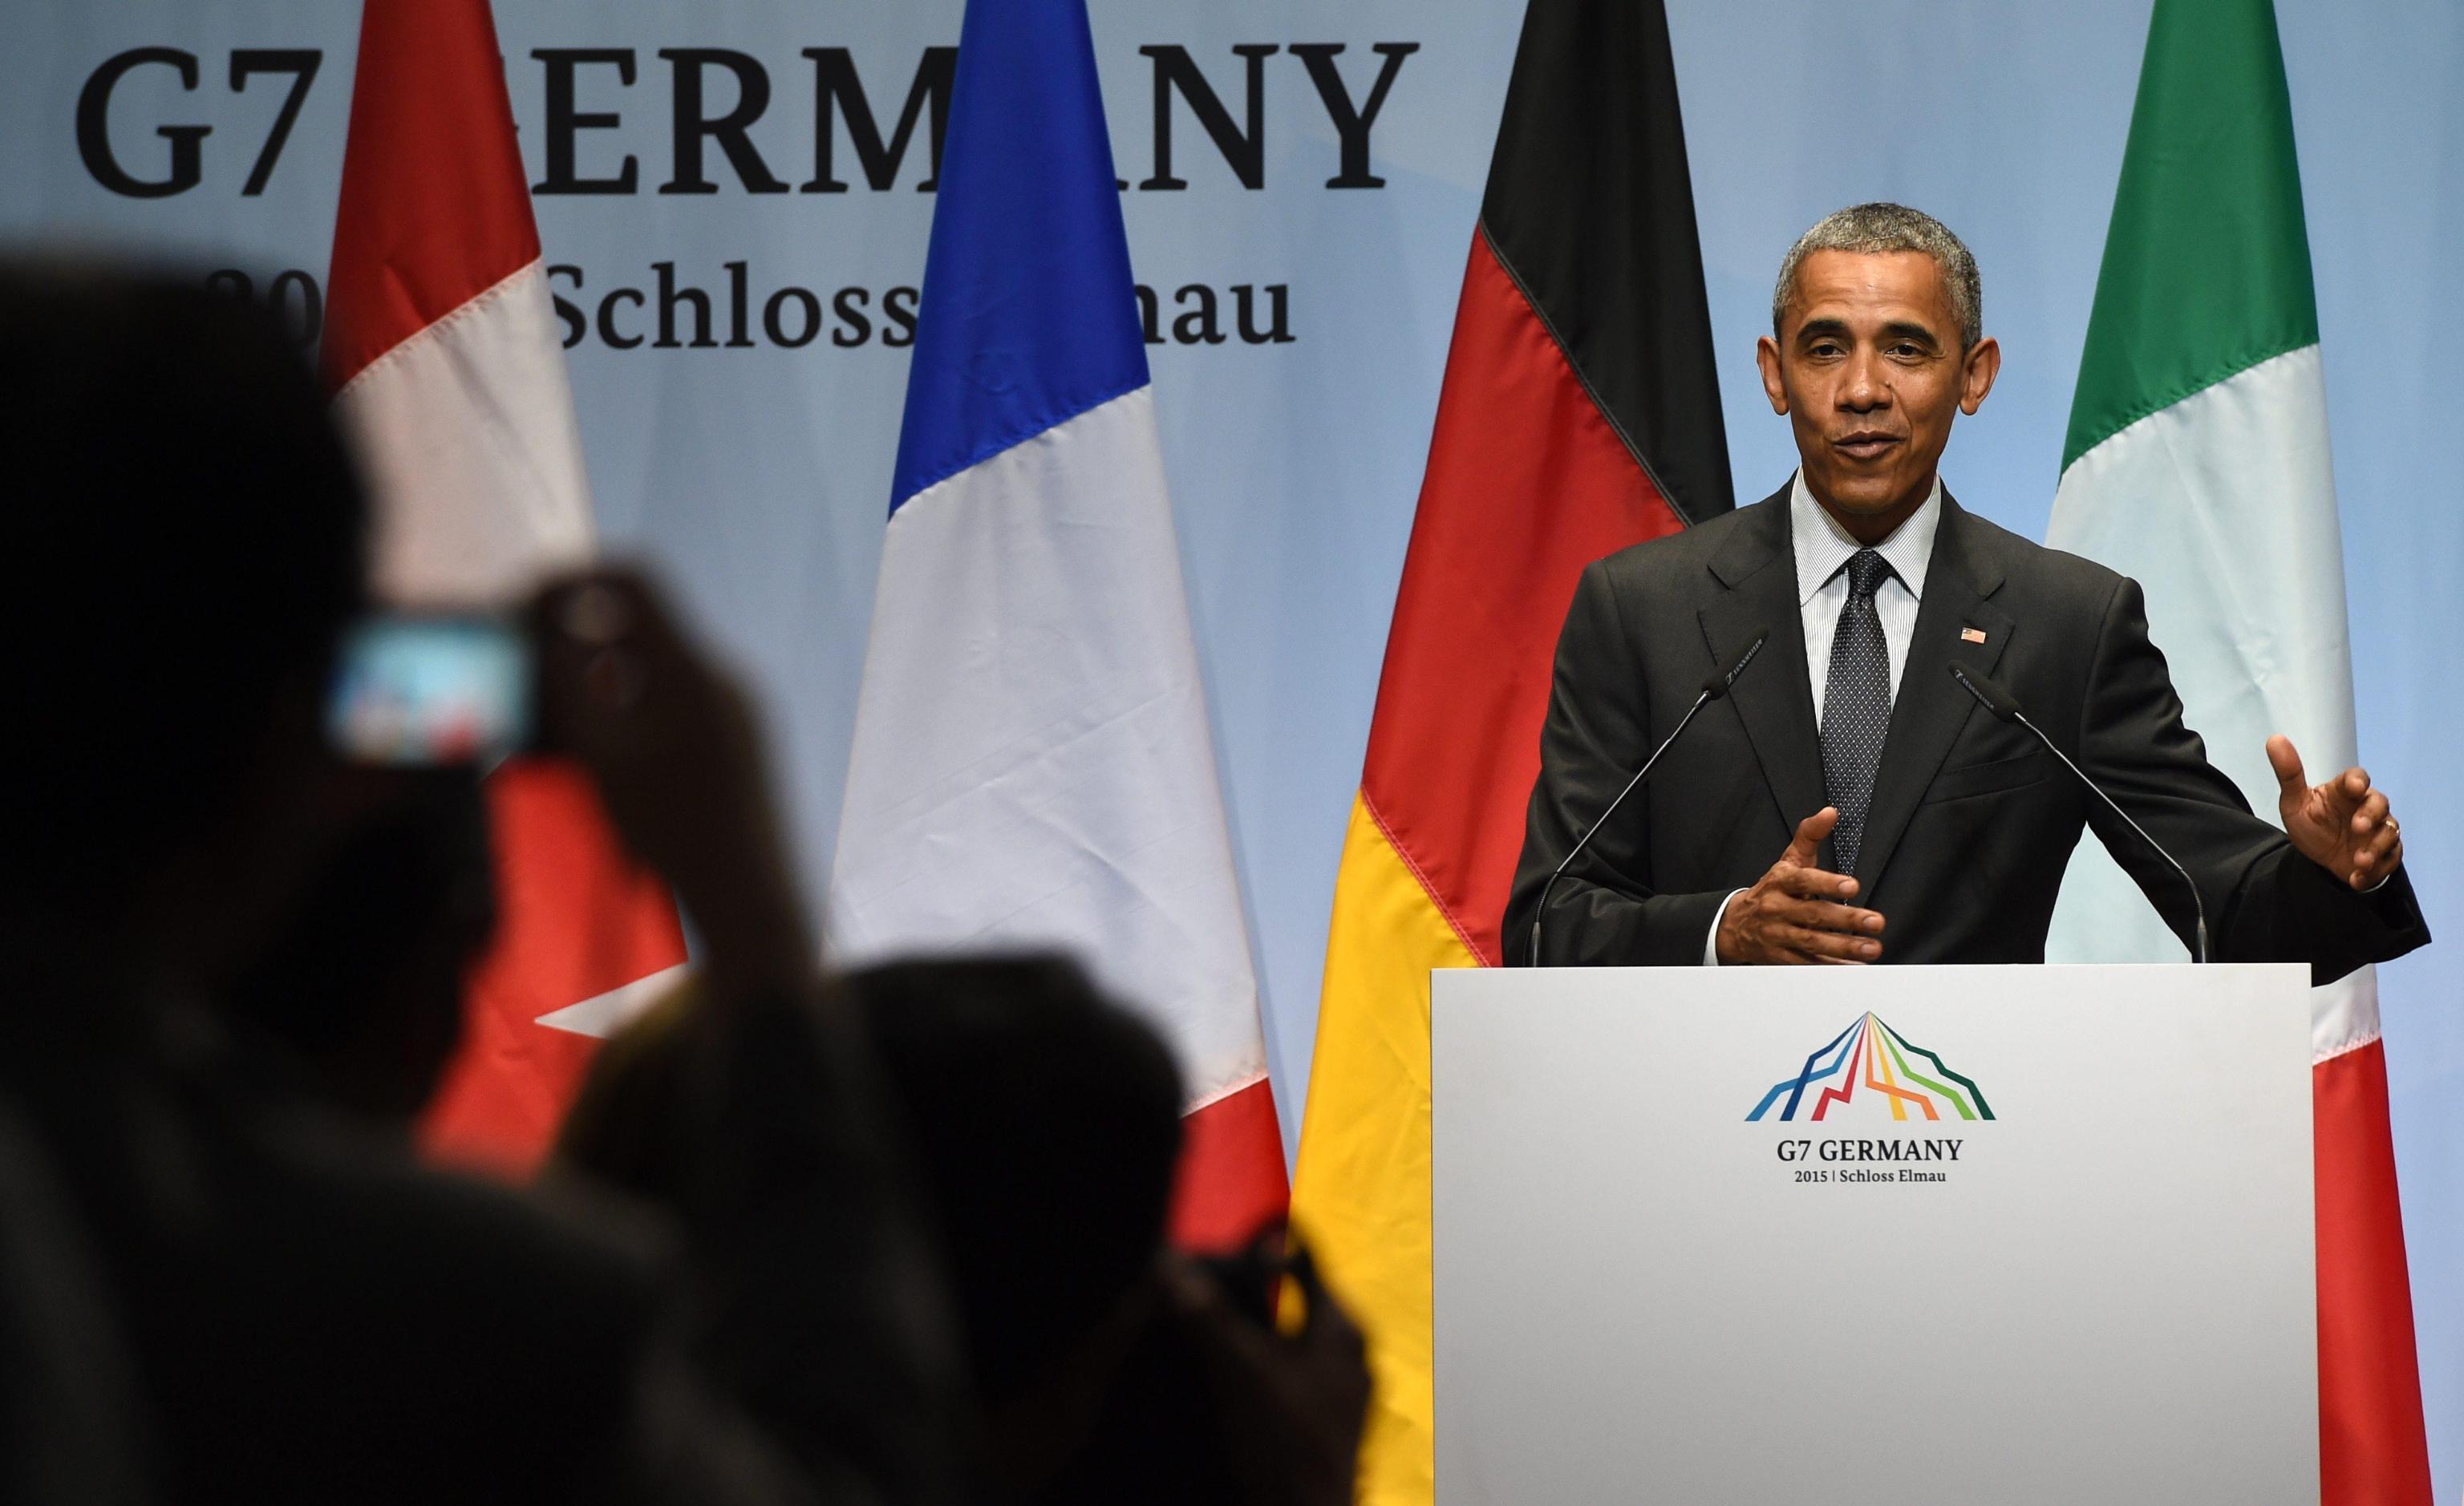 US President Barack Obama delivers a press conference during the G7 summit at Elmau Castle in Elmau